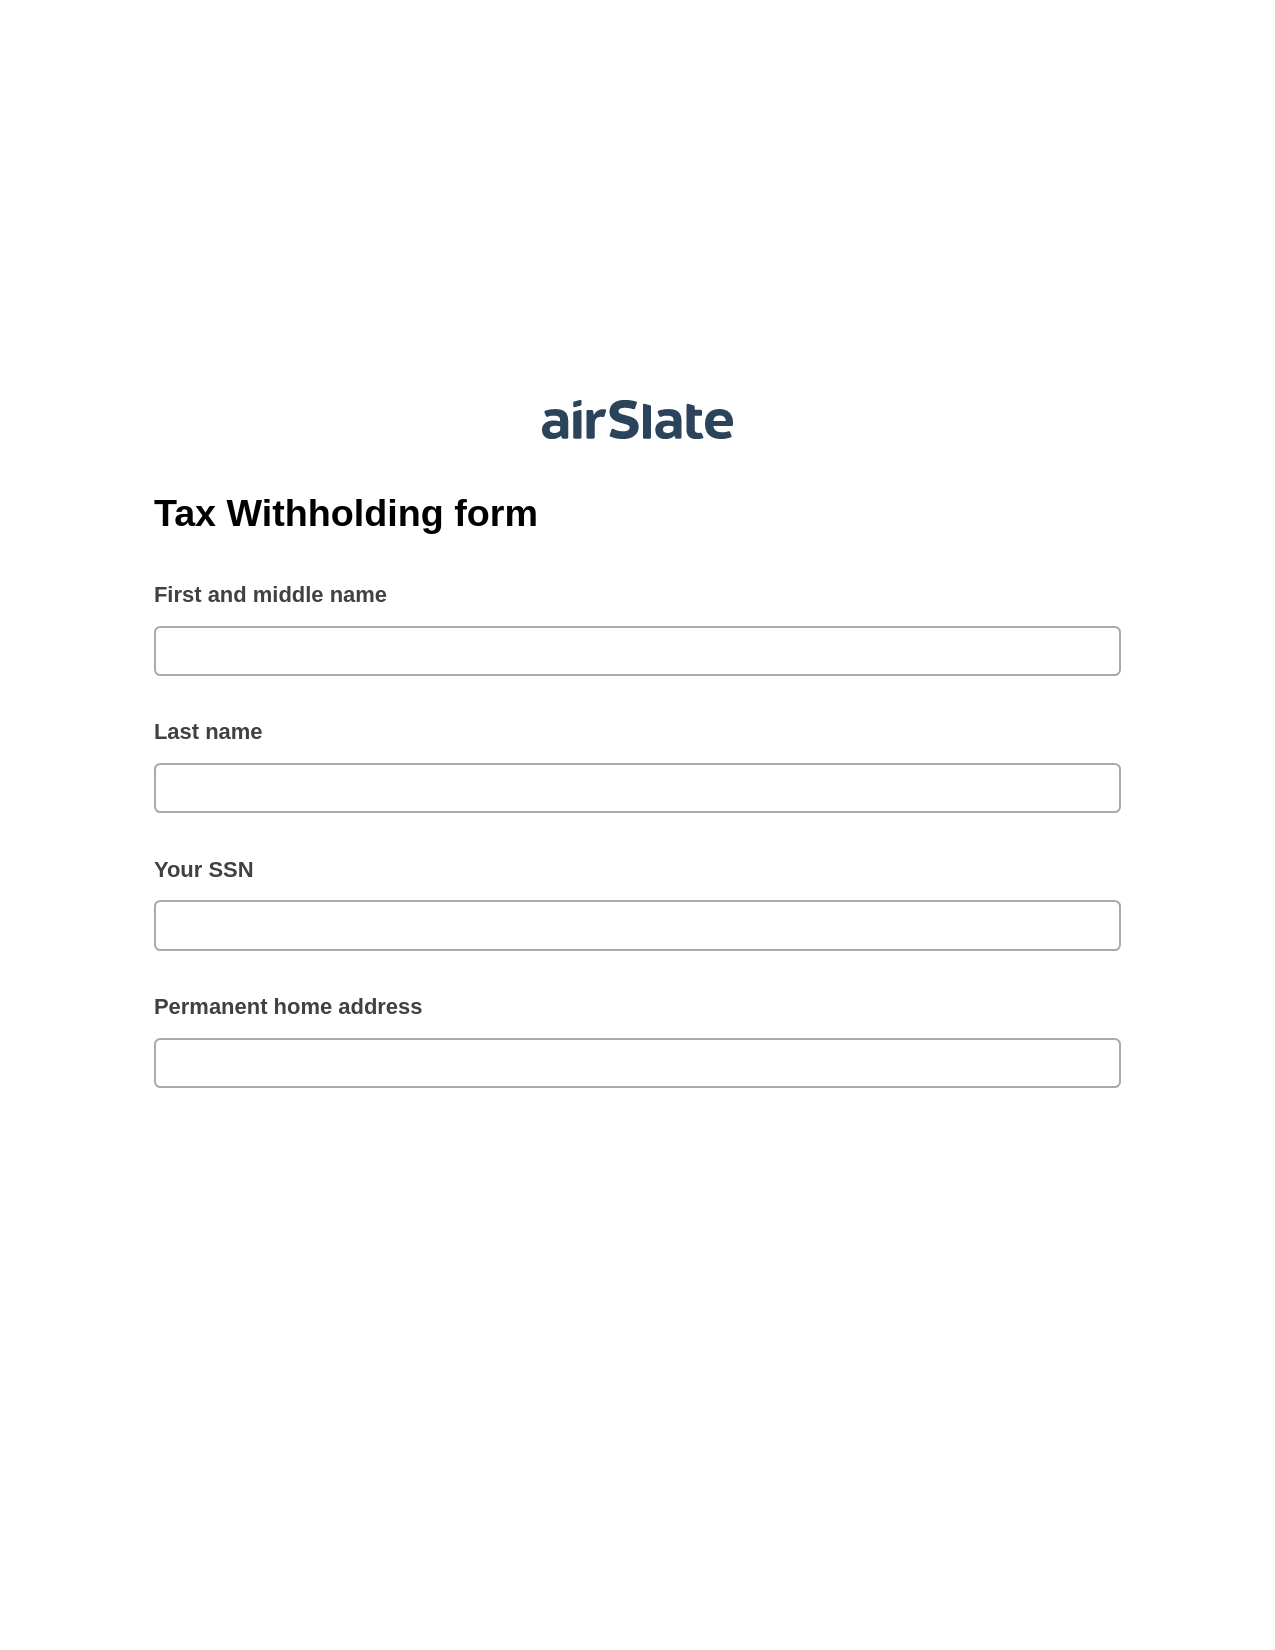 Multirole Tax Withholding form Pre-fill Document Bot, Jira Bot, Post-finish Document Bot